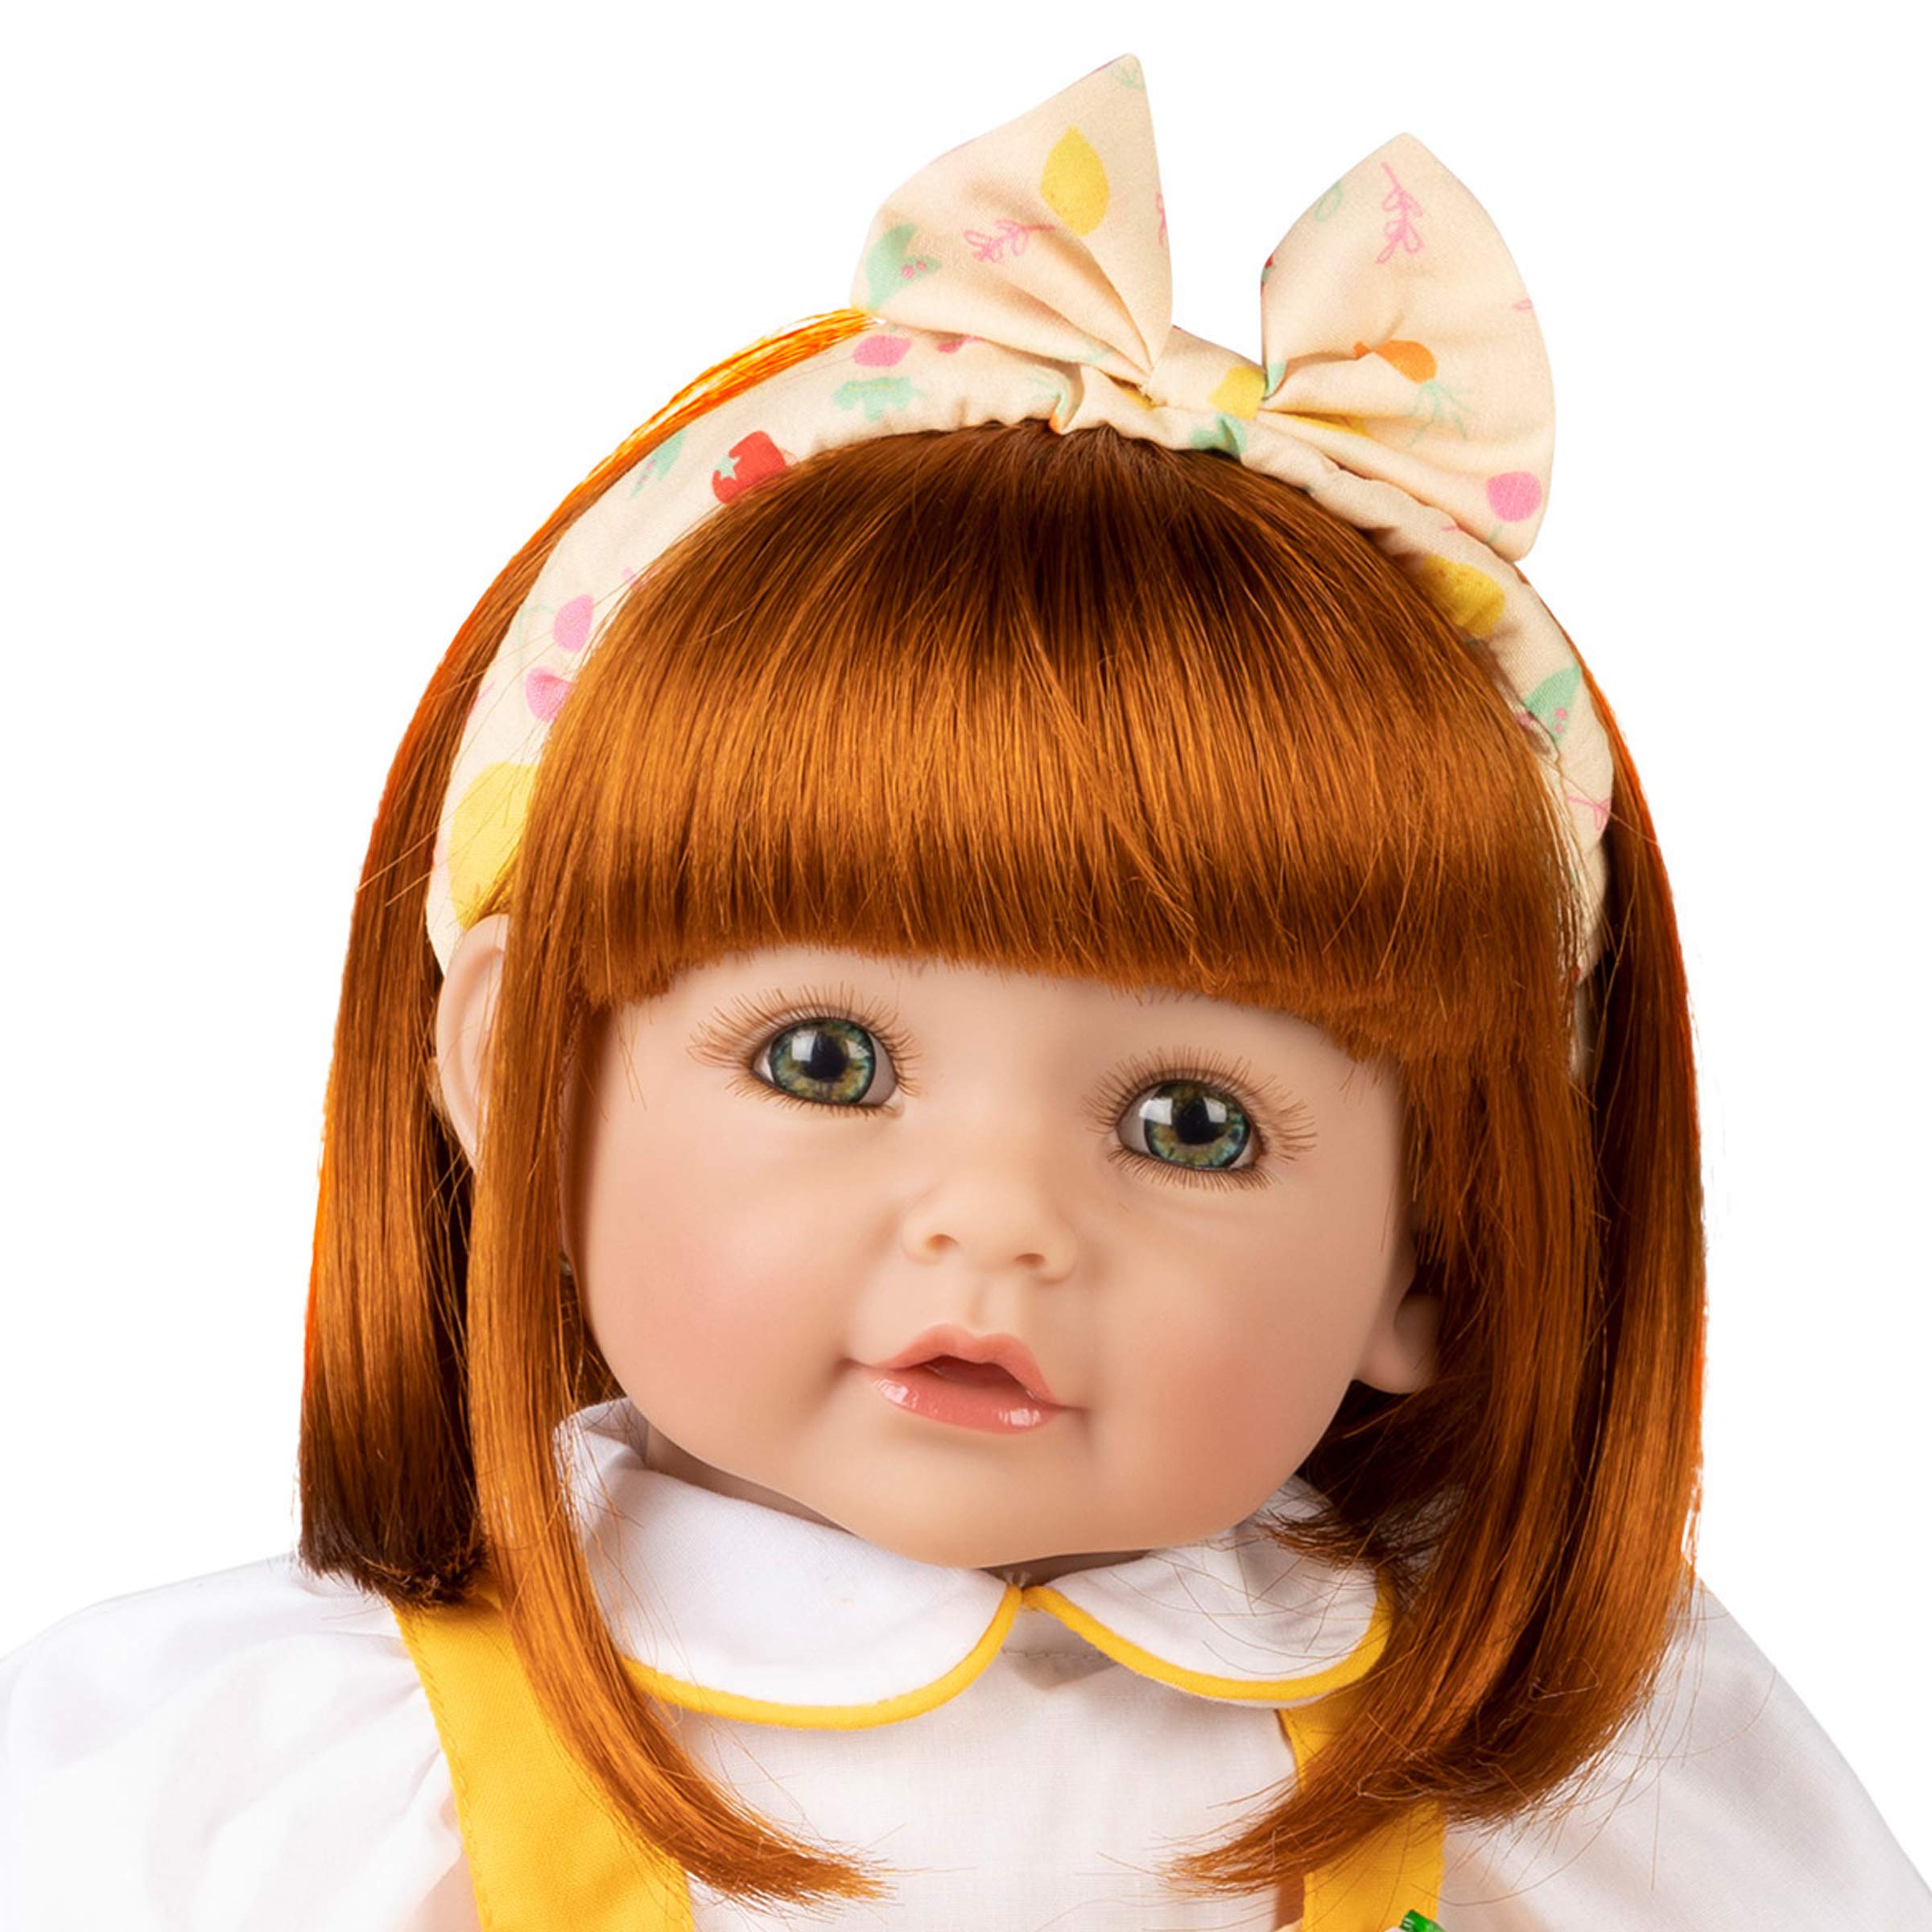 ADORA Realistic Baby Doll Organic Foodie Toddler Doll - 20 inch, Soft CuddleMe Vinyl, silky smooth red hair, Gray Eyes